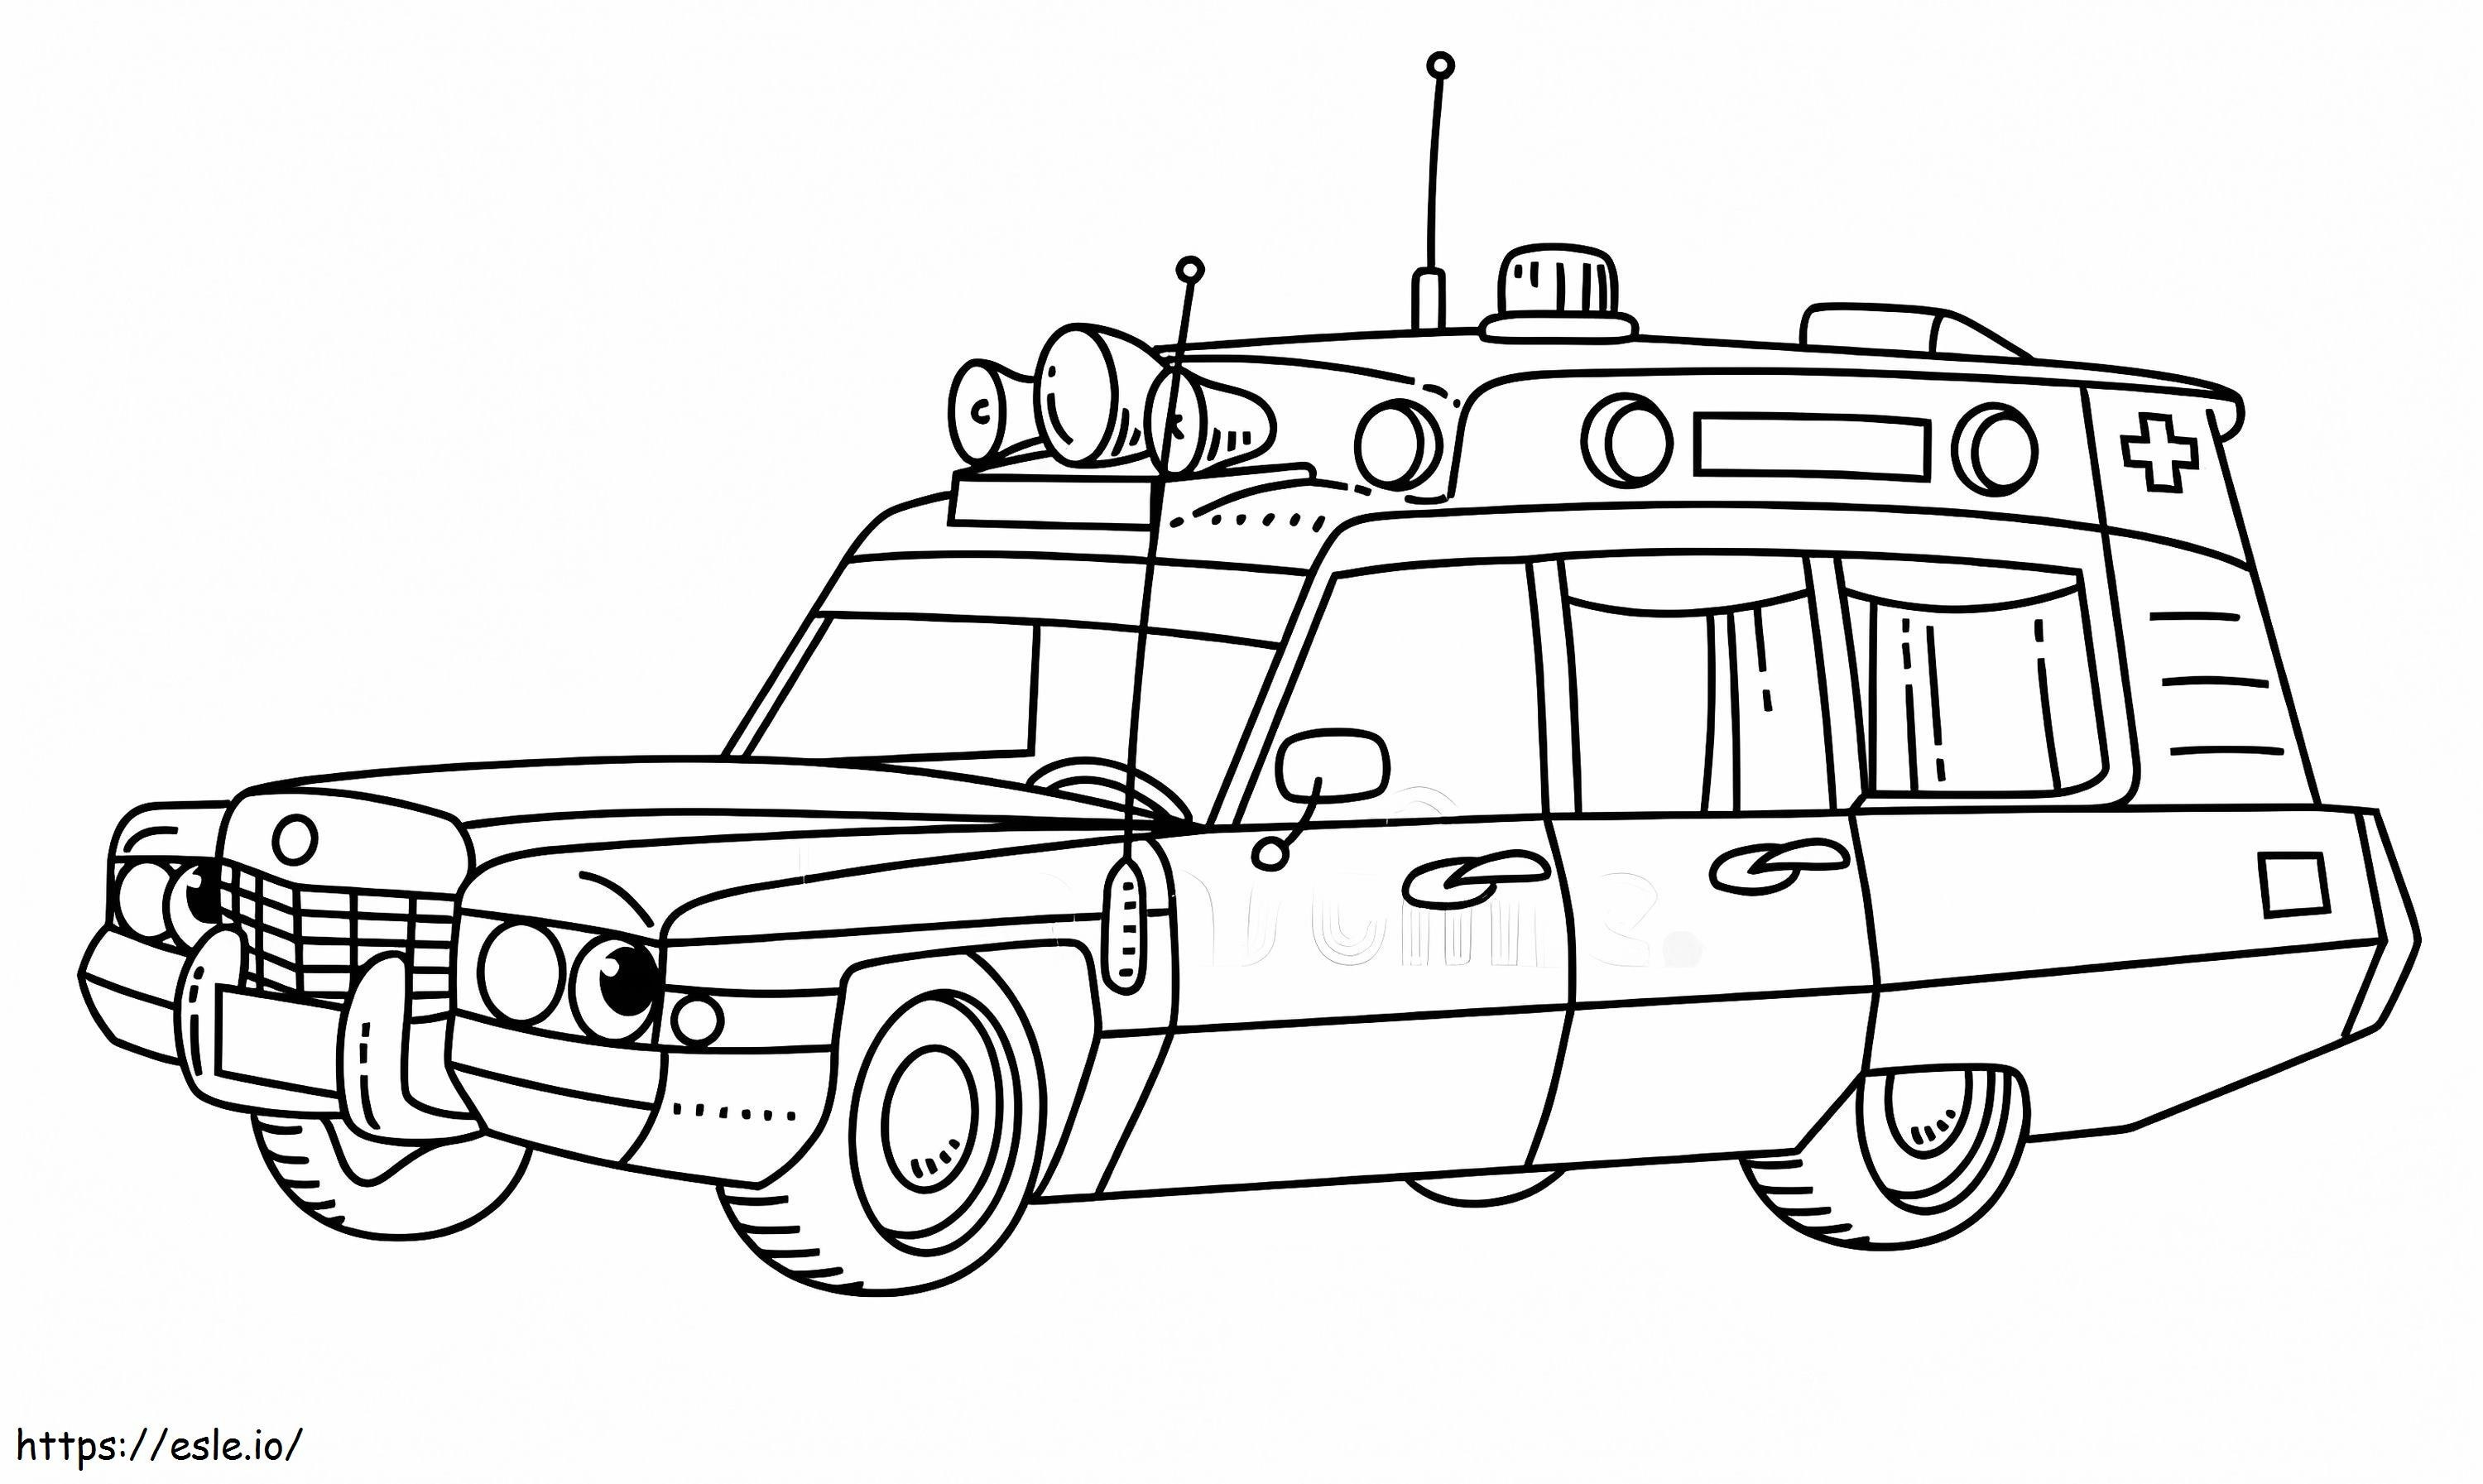 Ghostbusters Car coloring page